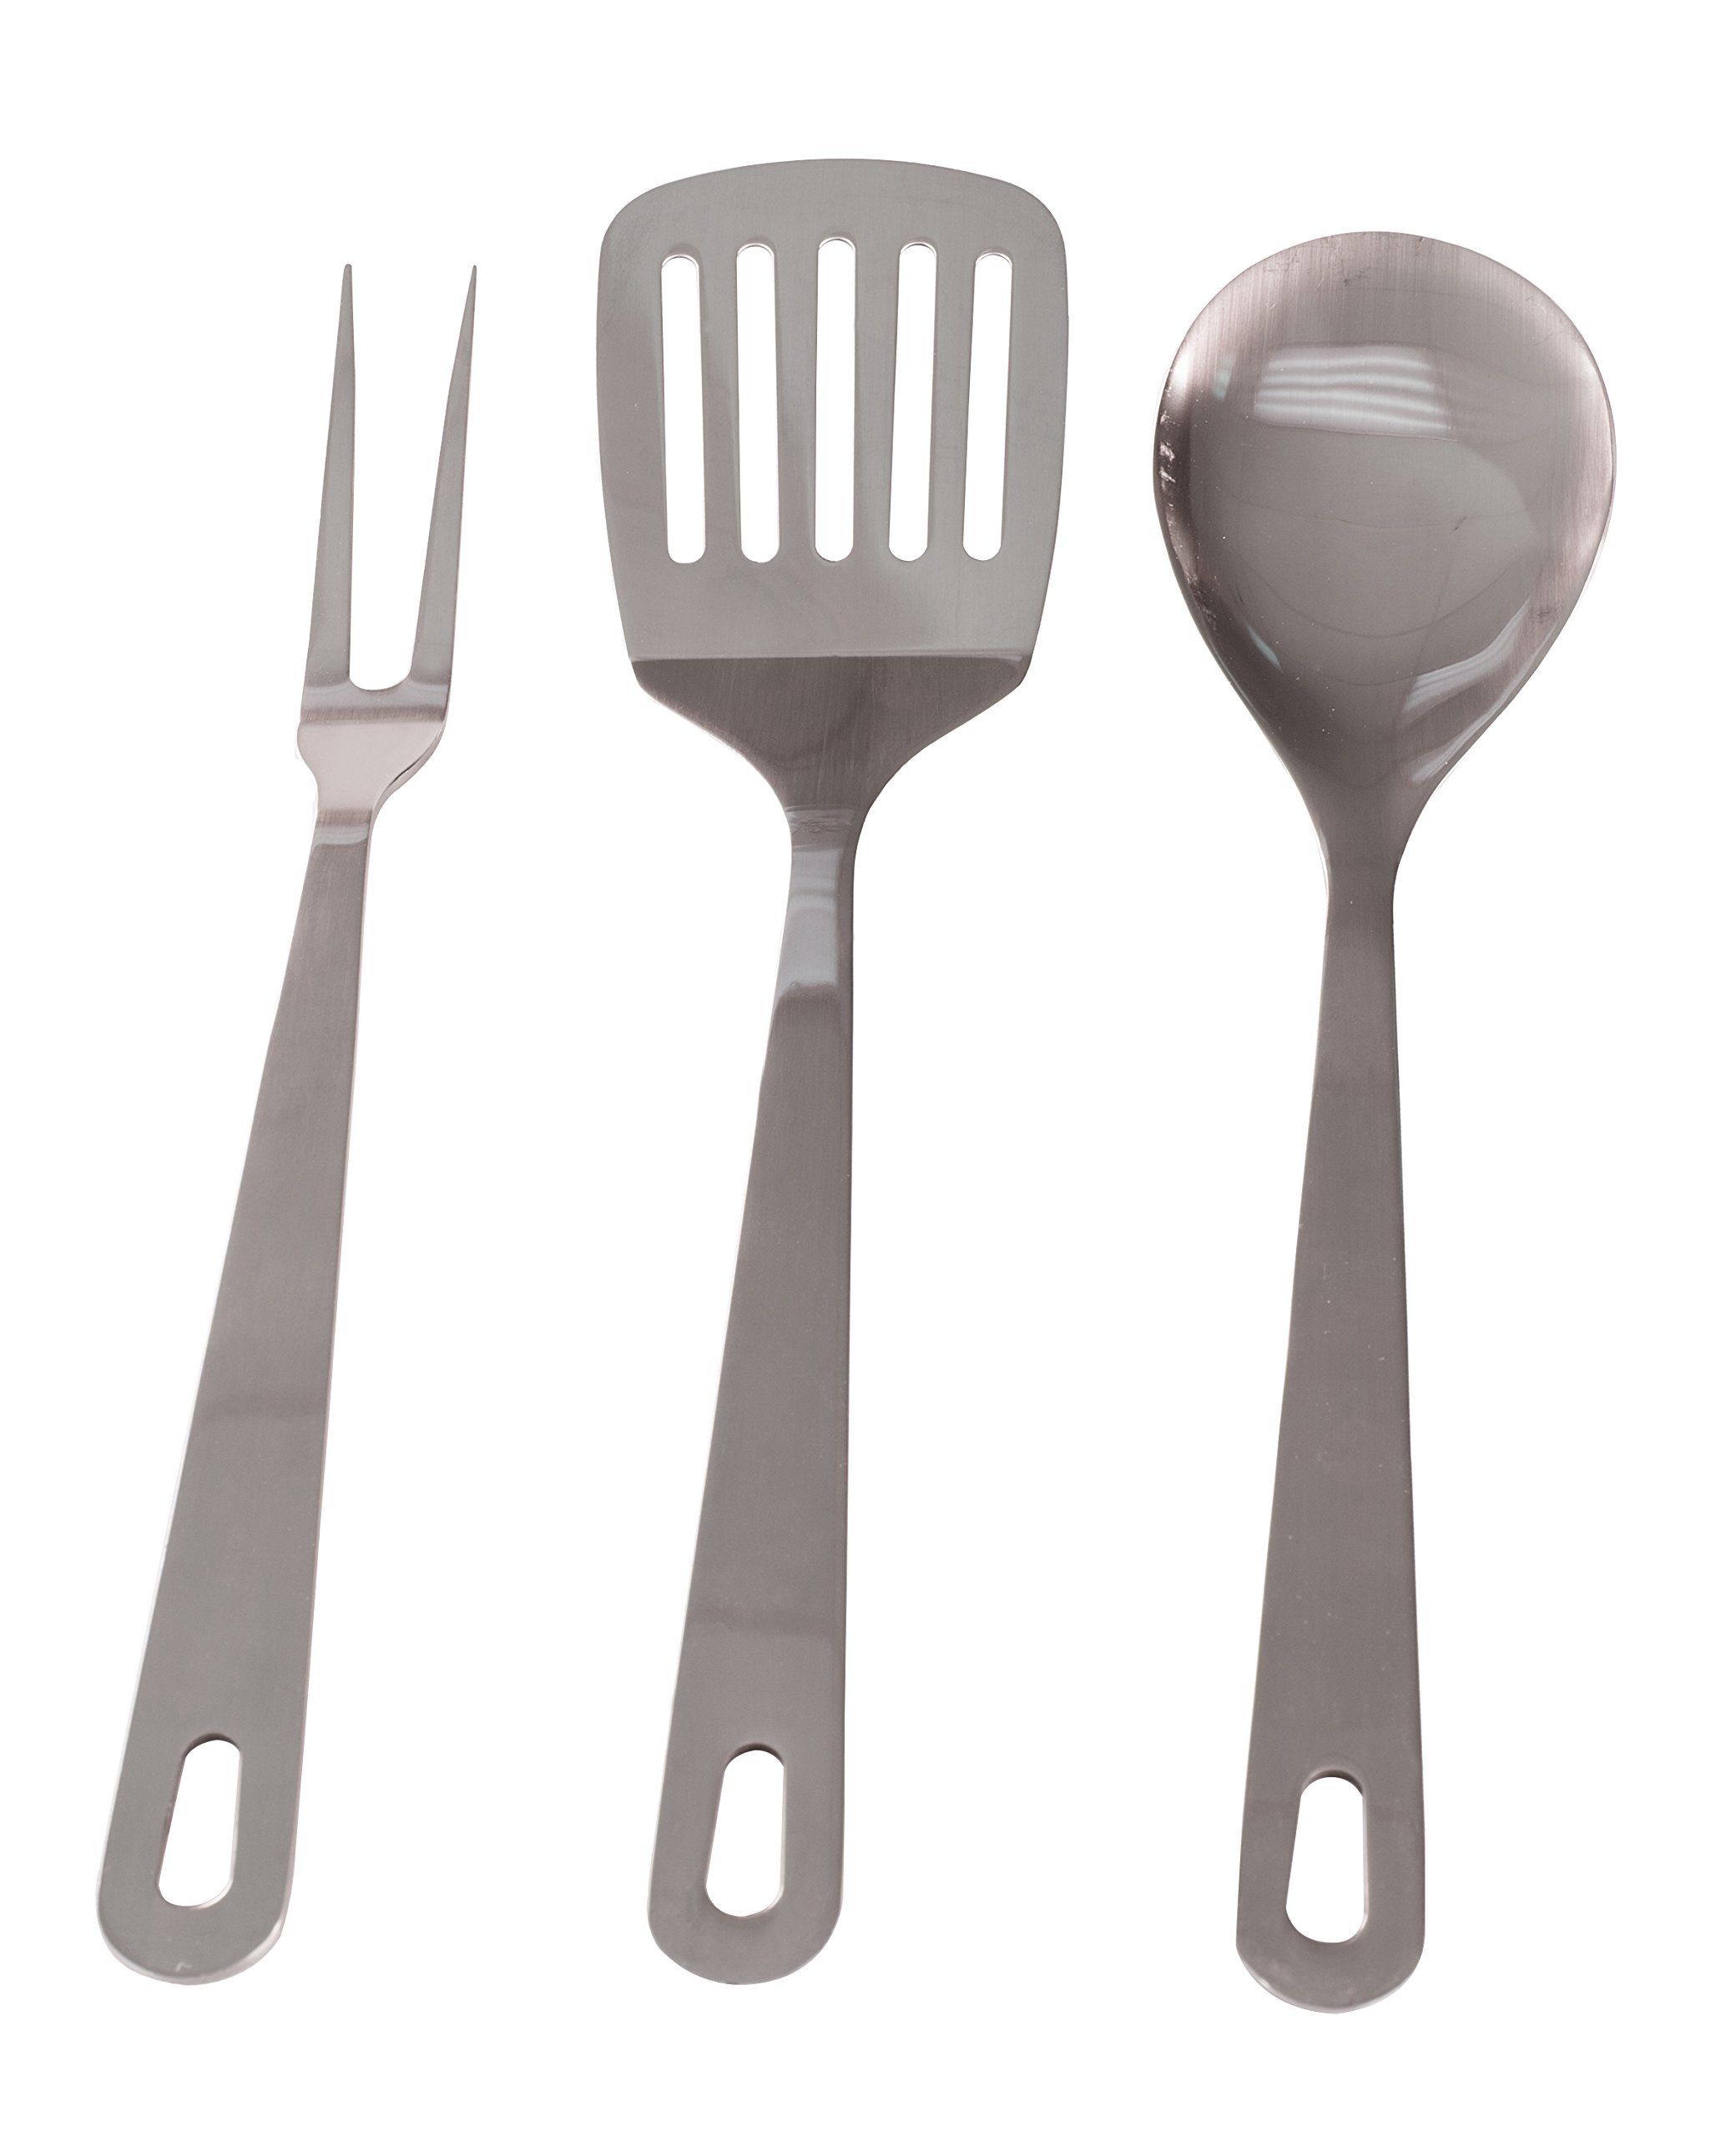 Stansport Stainless Steel Cooking Utensils (308-910)